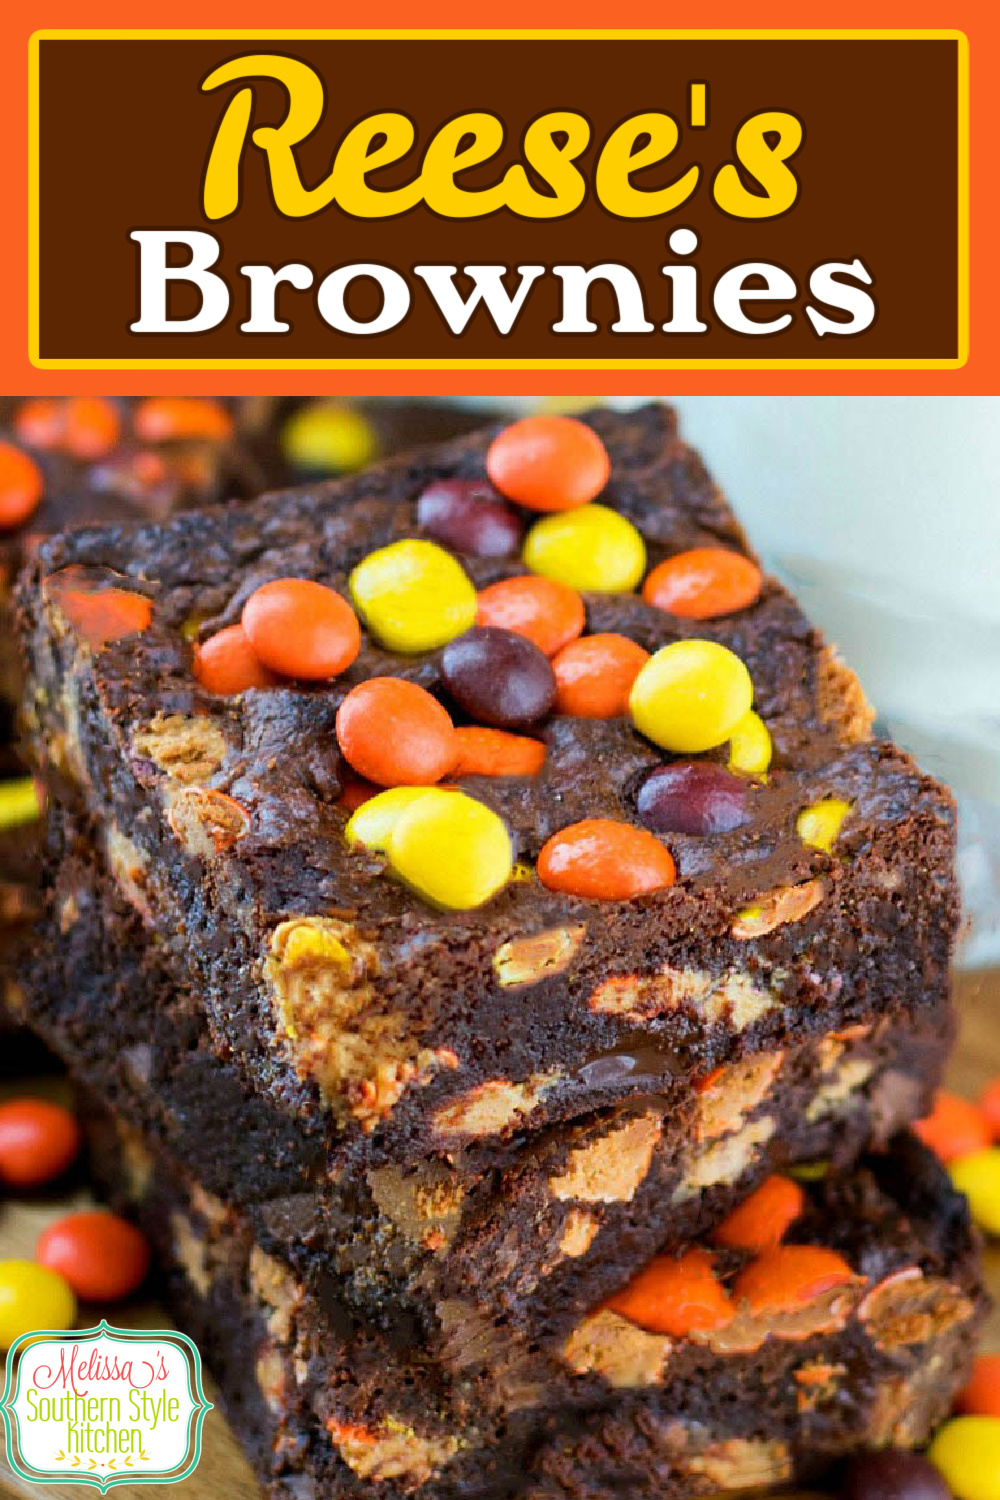 Fudgy Reese's Pieces Brownies are filled with chocolate chips, peanut butter cups and Reese's pieces, making these brownies hard to resist. #reesesbrownies #brownies #bestbrownies #peanutbutterbrownies #chocolate #chocolatebars #reesespieces #desserts #dessertfoodrecipes #holidaybaking #holidays #footballdesserts #peanutbutter #southernfood #southernrecipes #melissassoutherntylekitchen via @melissasssk